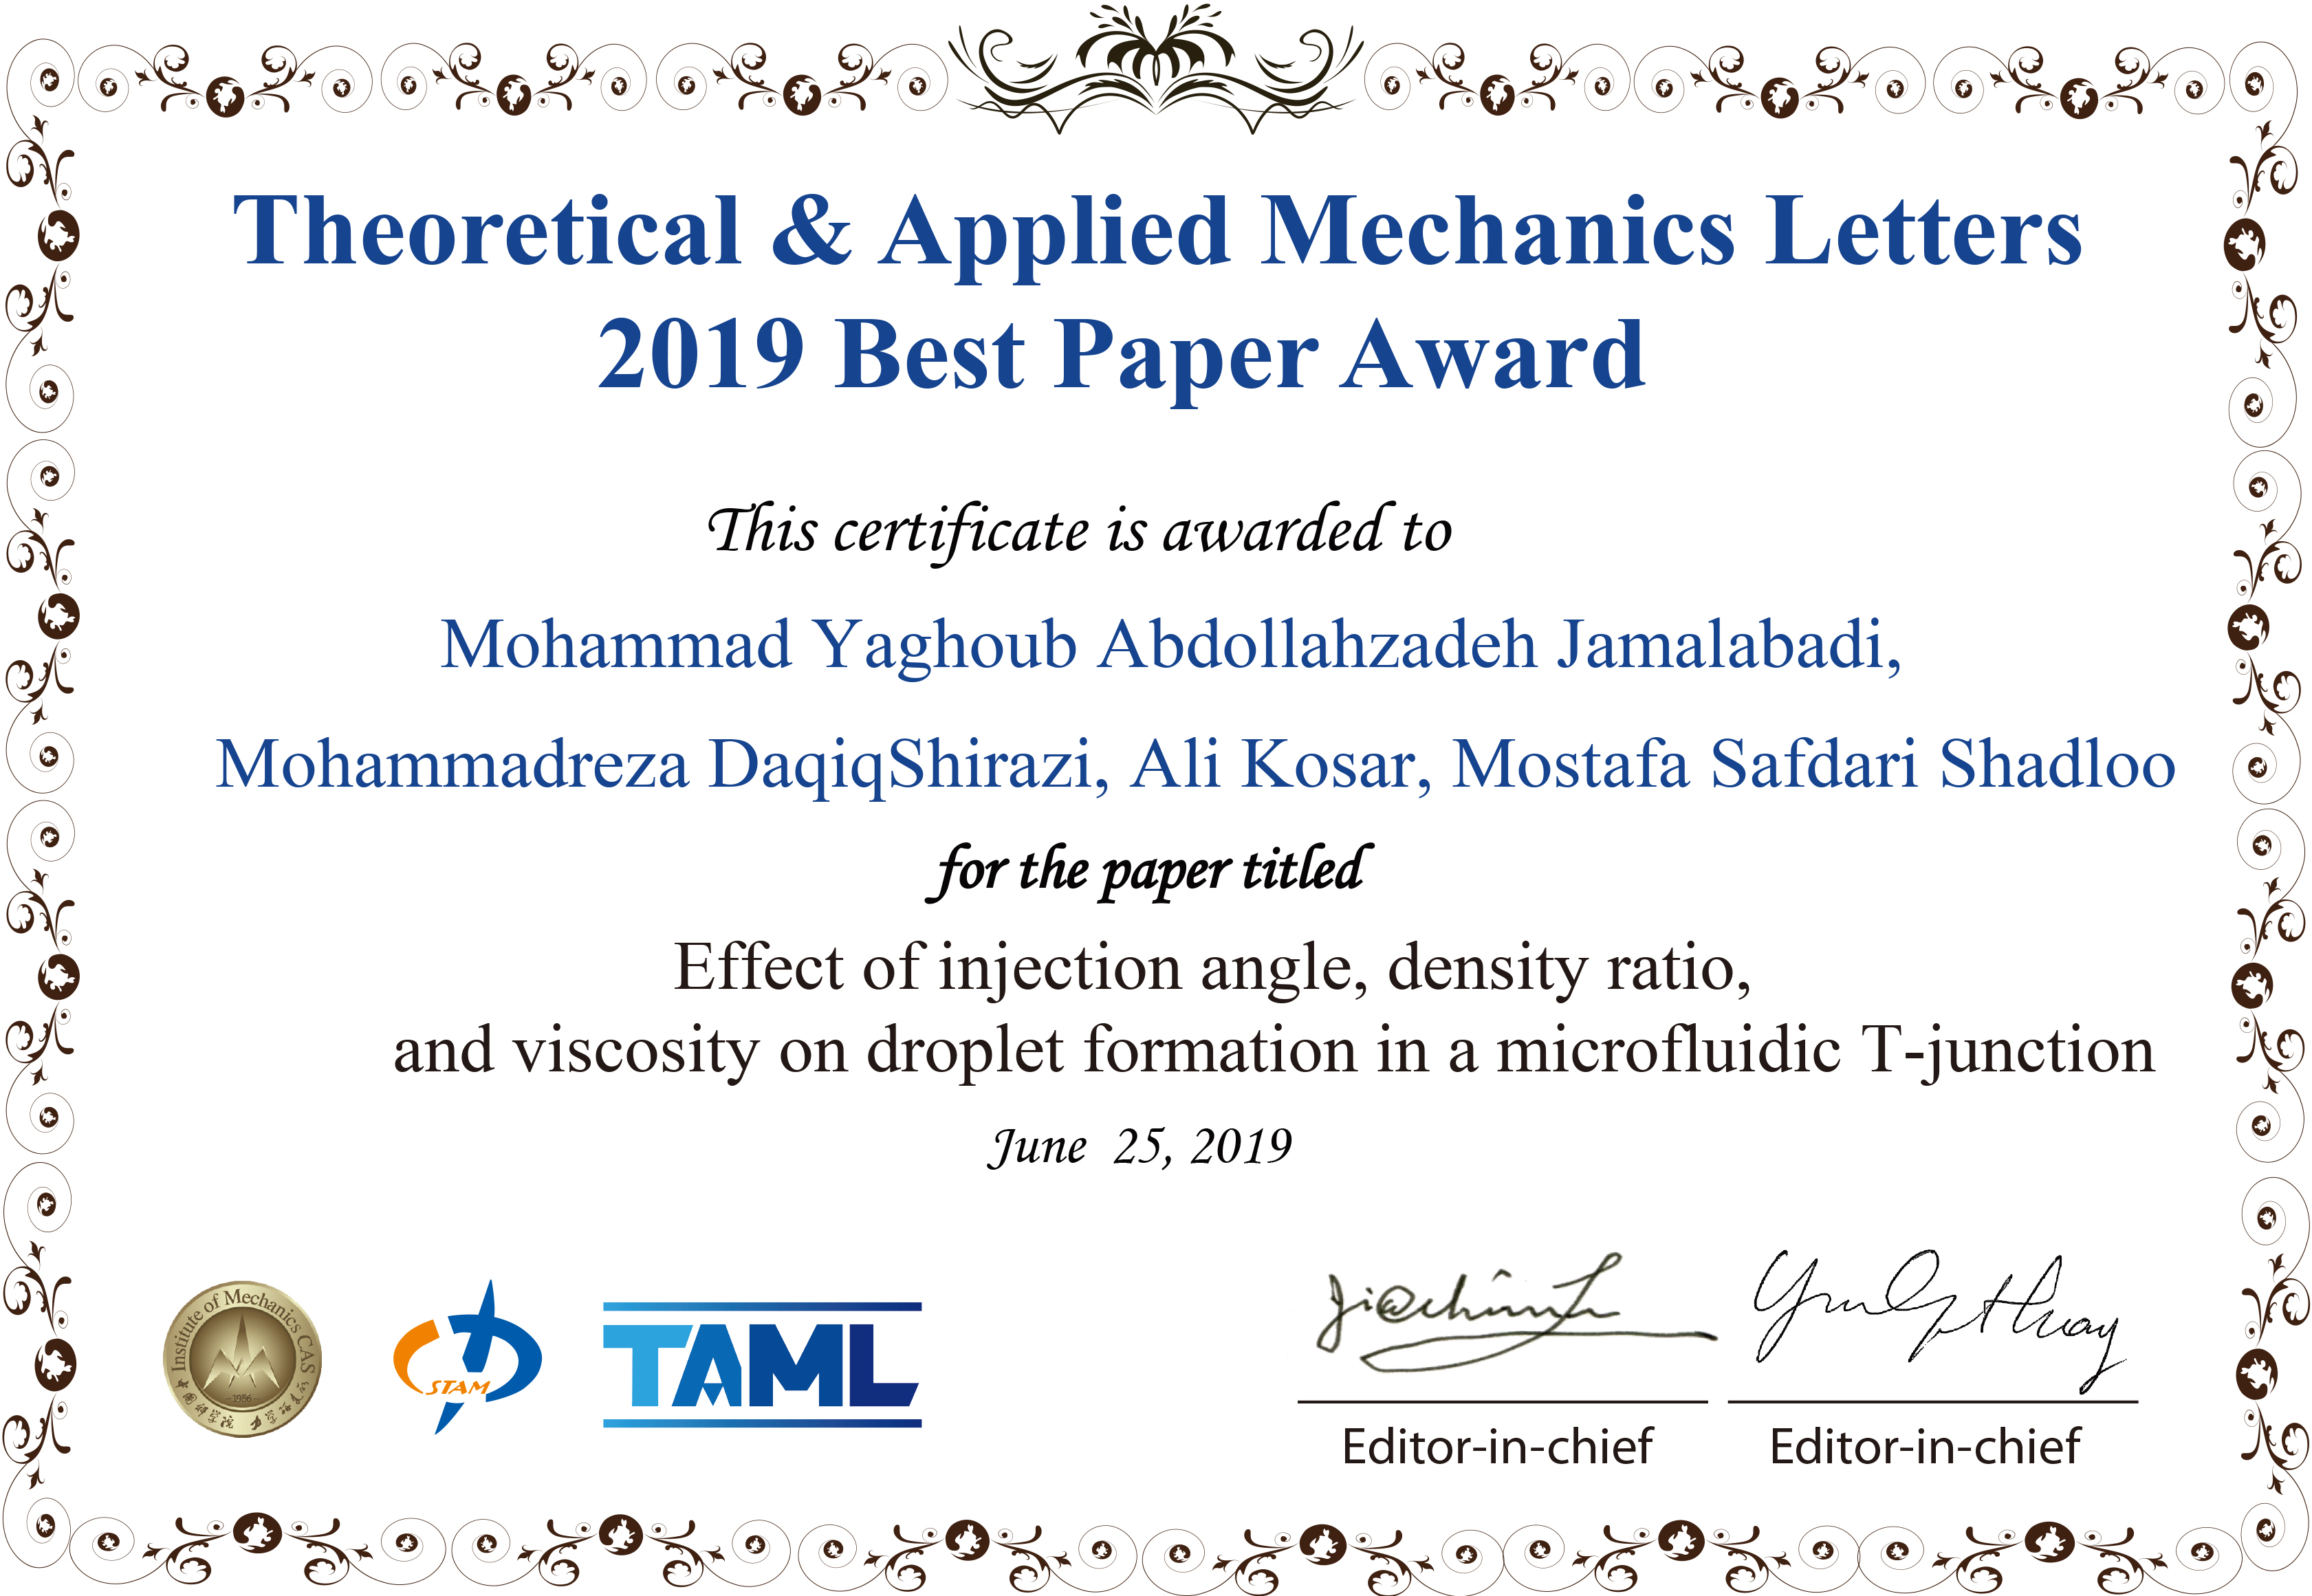 Congratulations to Theoretical & Applied Mechanics Letters 2014 Best Paper Award Winners